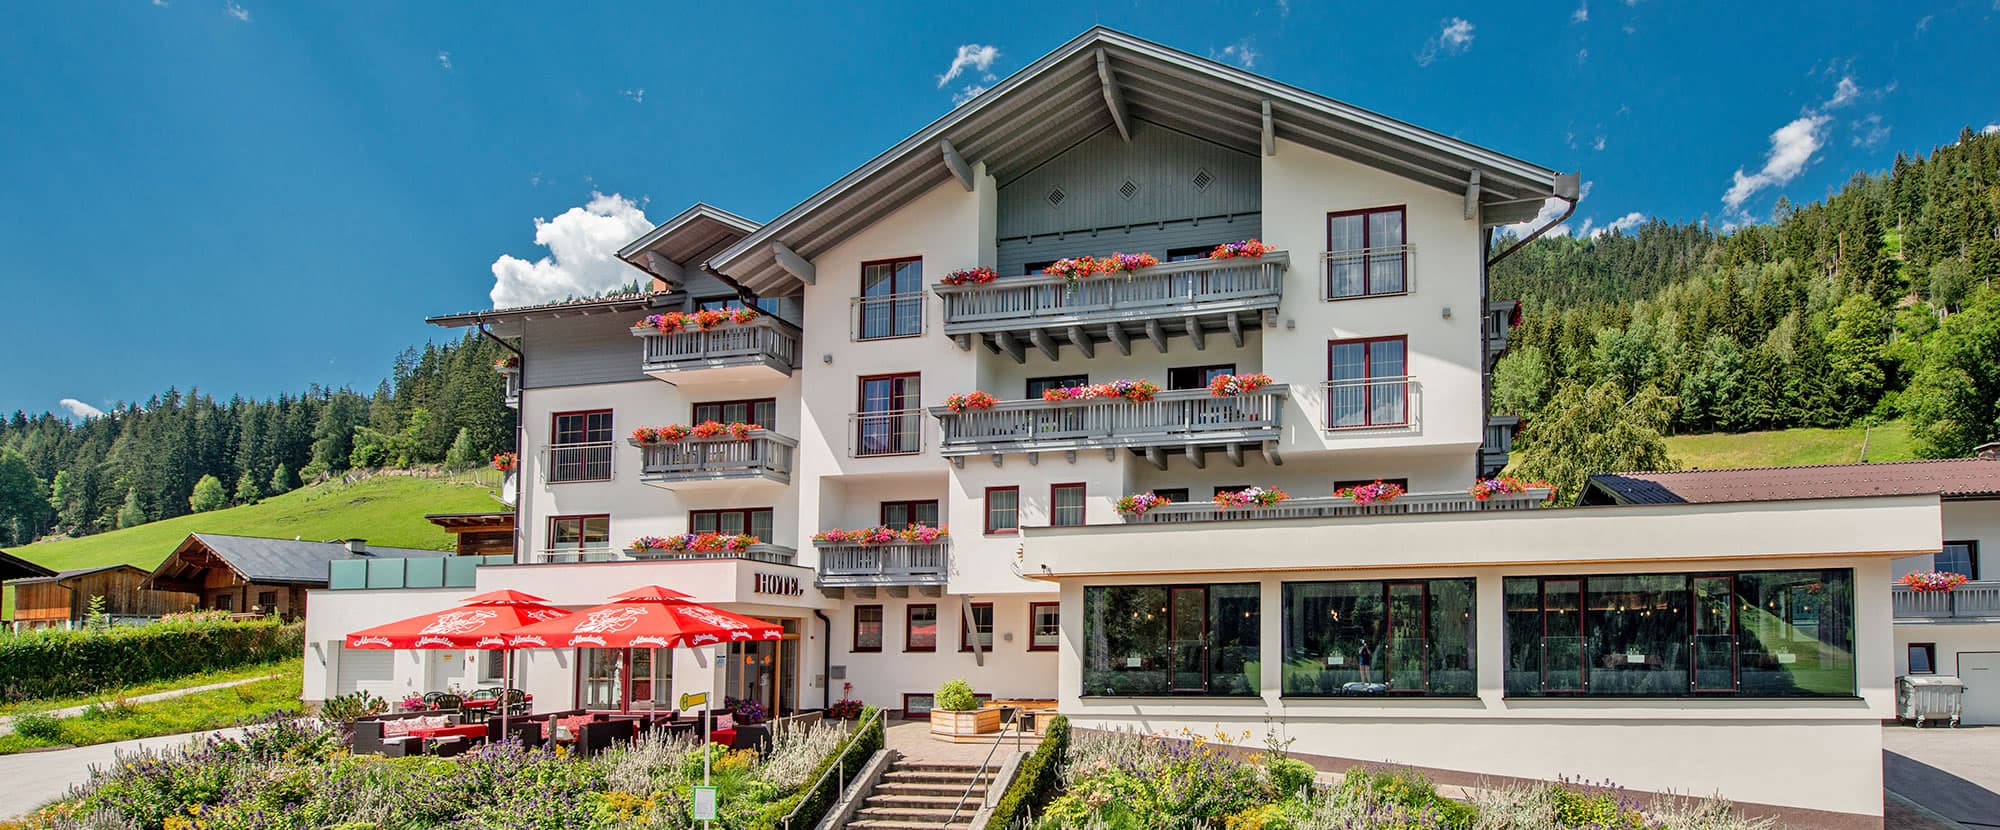 Schladming Hotel Sonnschupfer | Good value 3 star Superior Hotel in the Schladming-Dachstein area -> perfect for your summer holiday in Austria